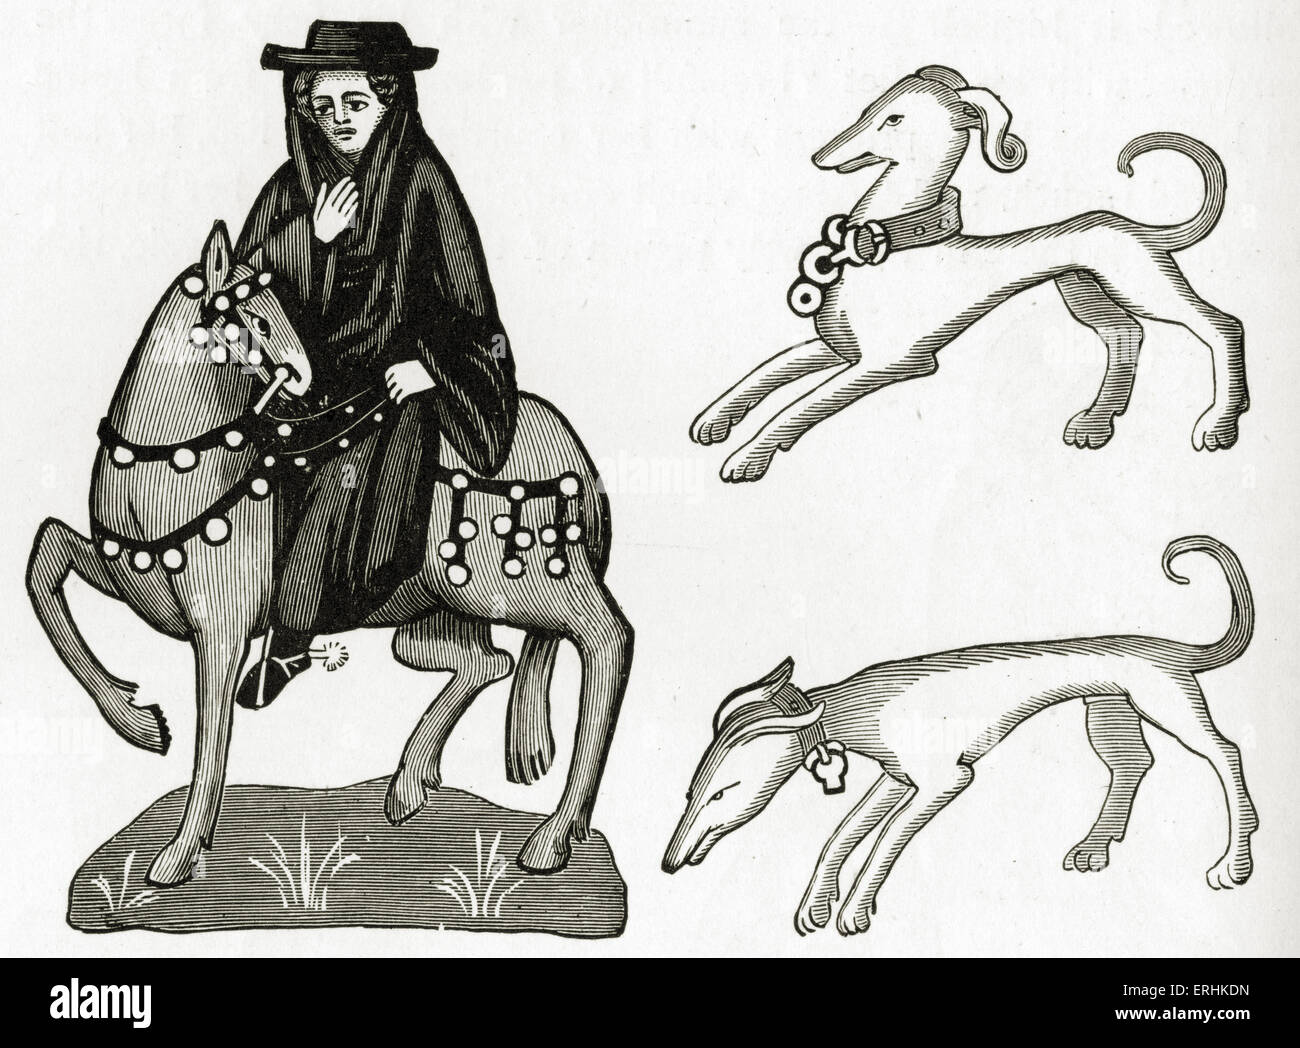 Geoffrey Chaucer ' s Canterbury Tales - The Monk and his Dogs. English  poet, c. 1343-1400. Pilgrims. Ellesmere manuscript of Stock Photo - Alamy